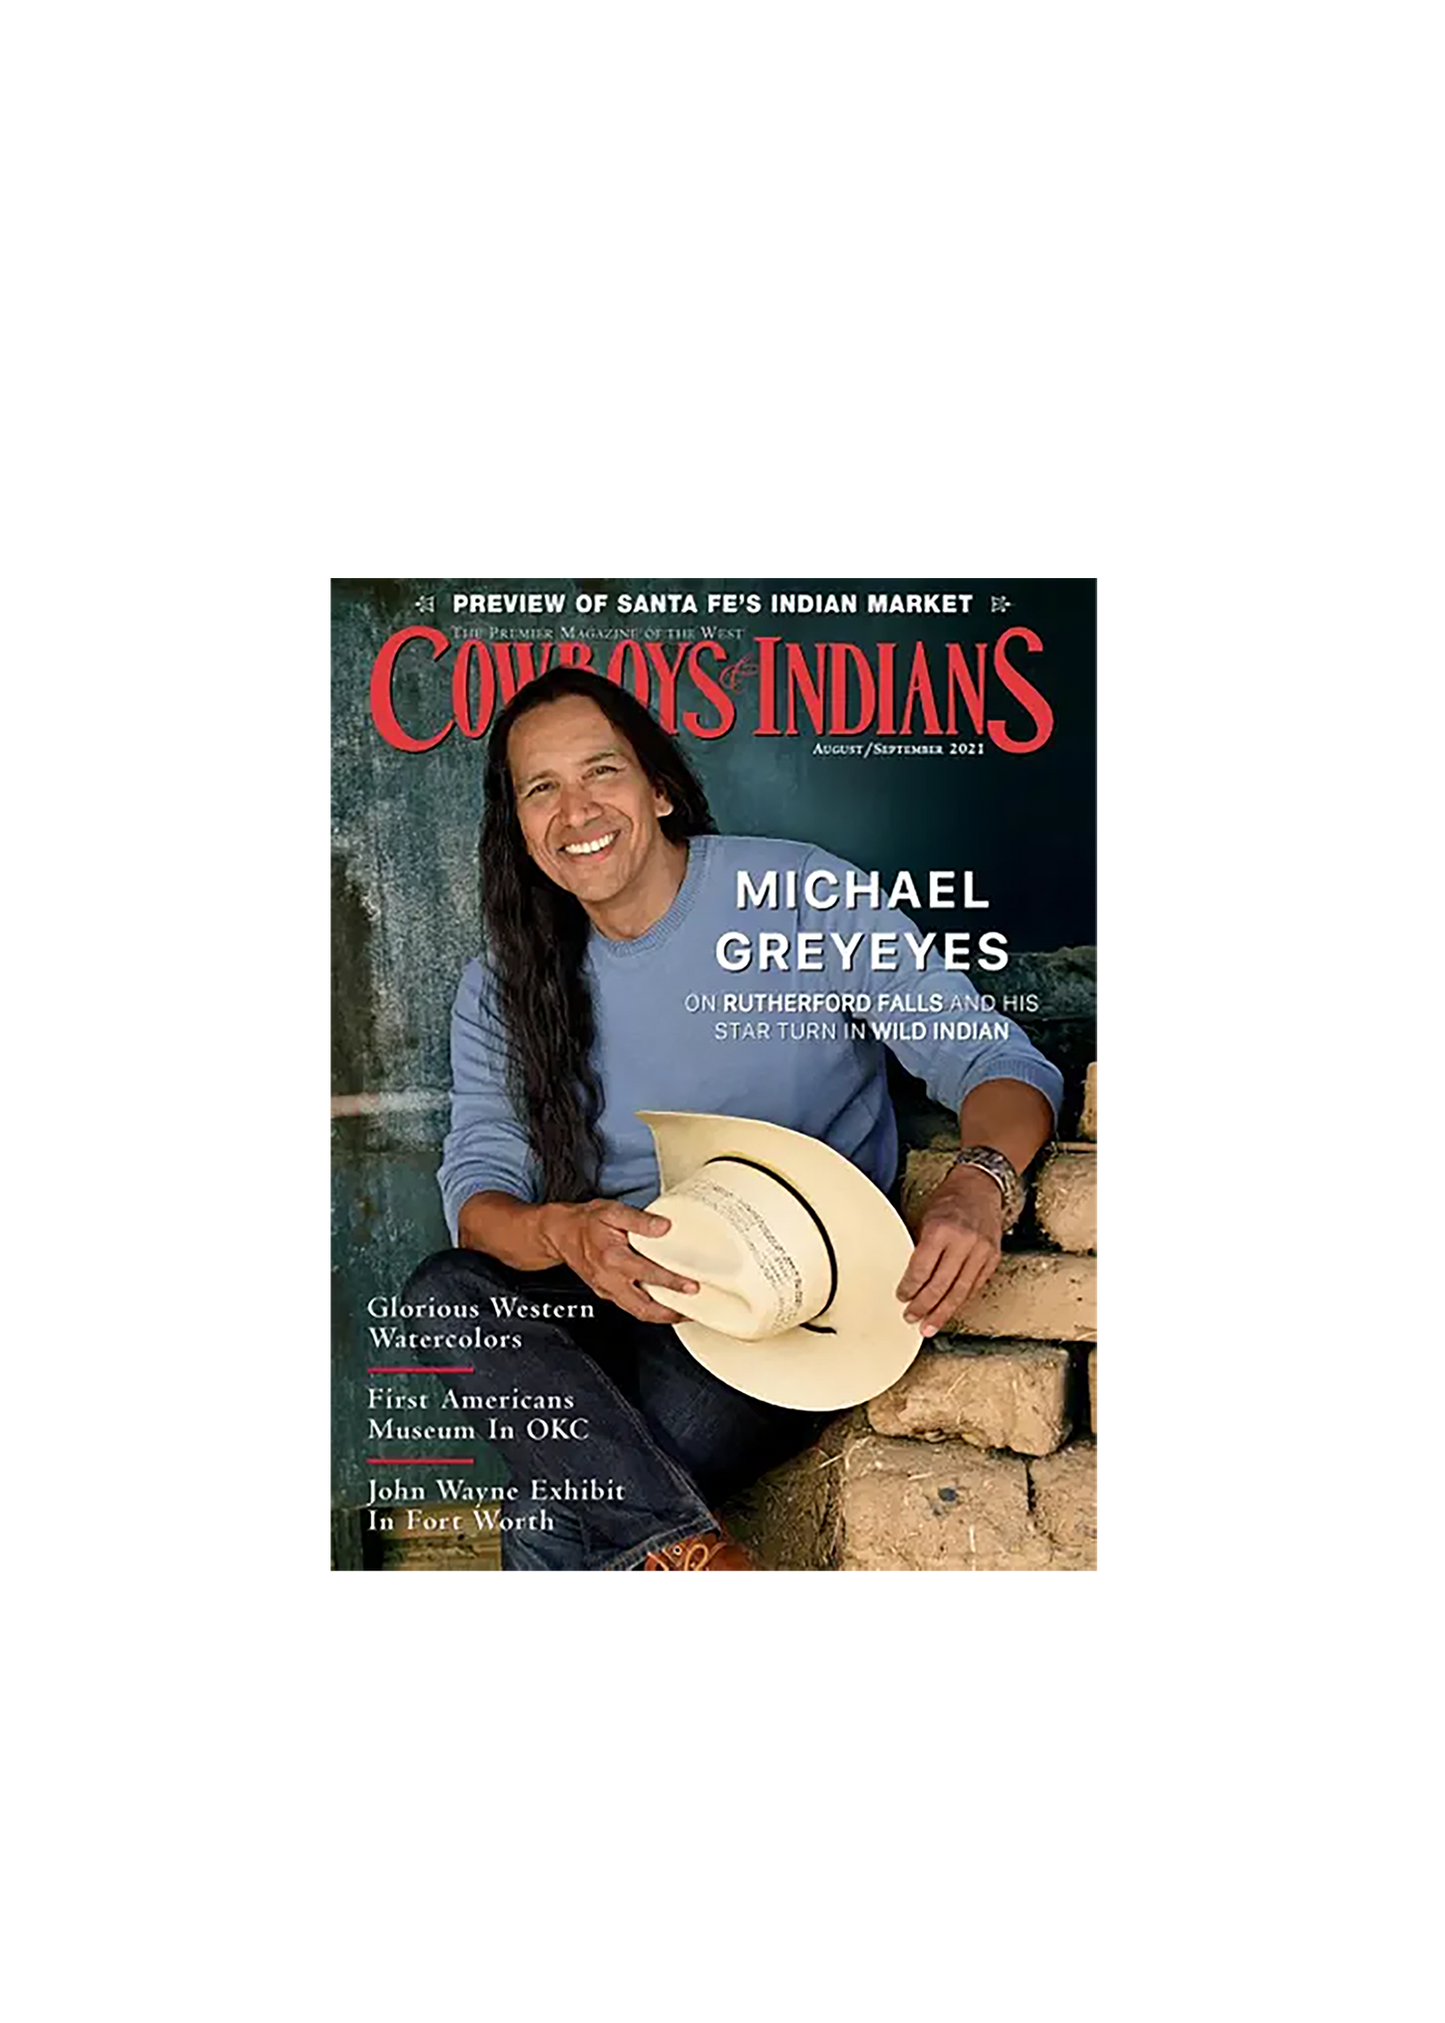 Cowboys And Indians Magazine